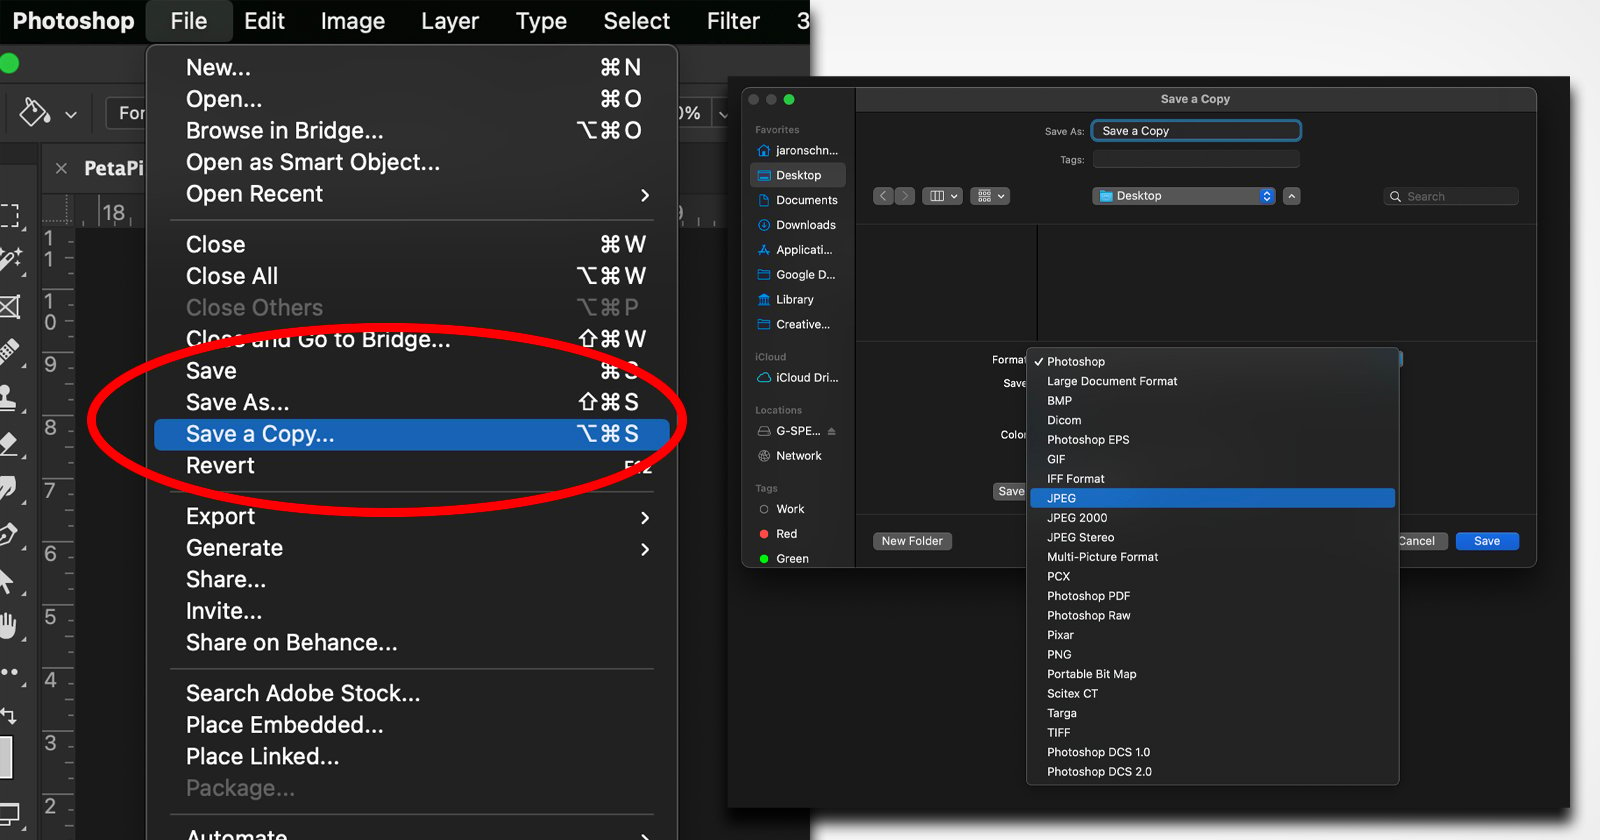 Photoshop's 'Save As' Function Has Changed. Here's Why   PetaPixel